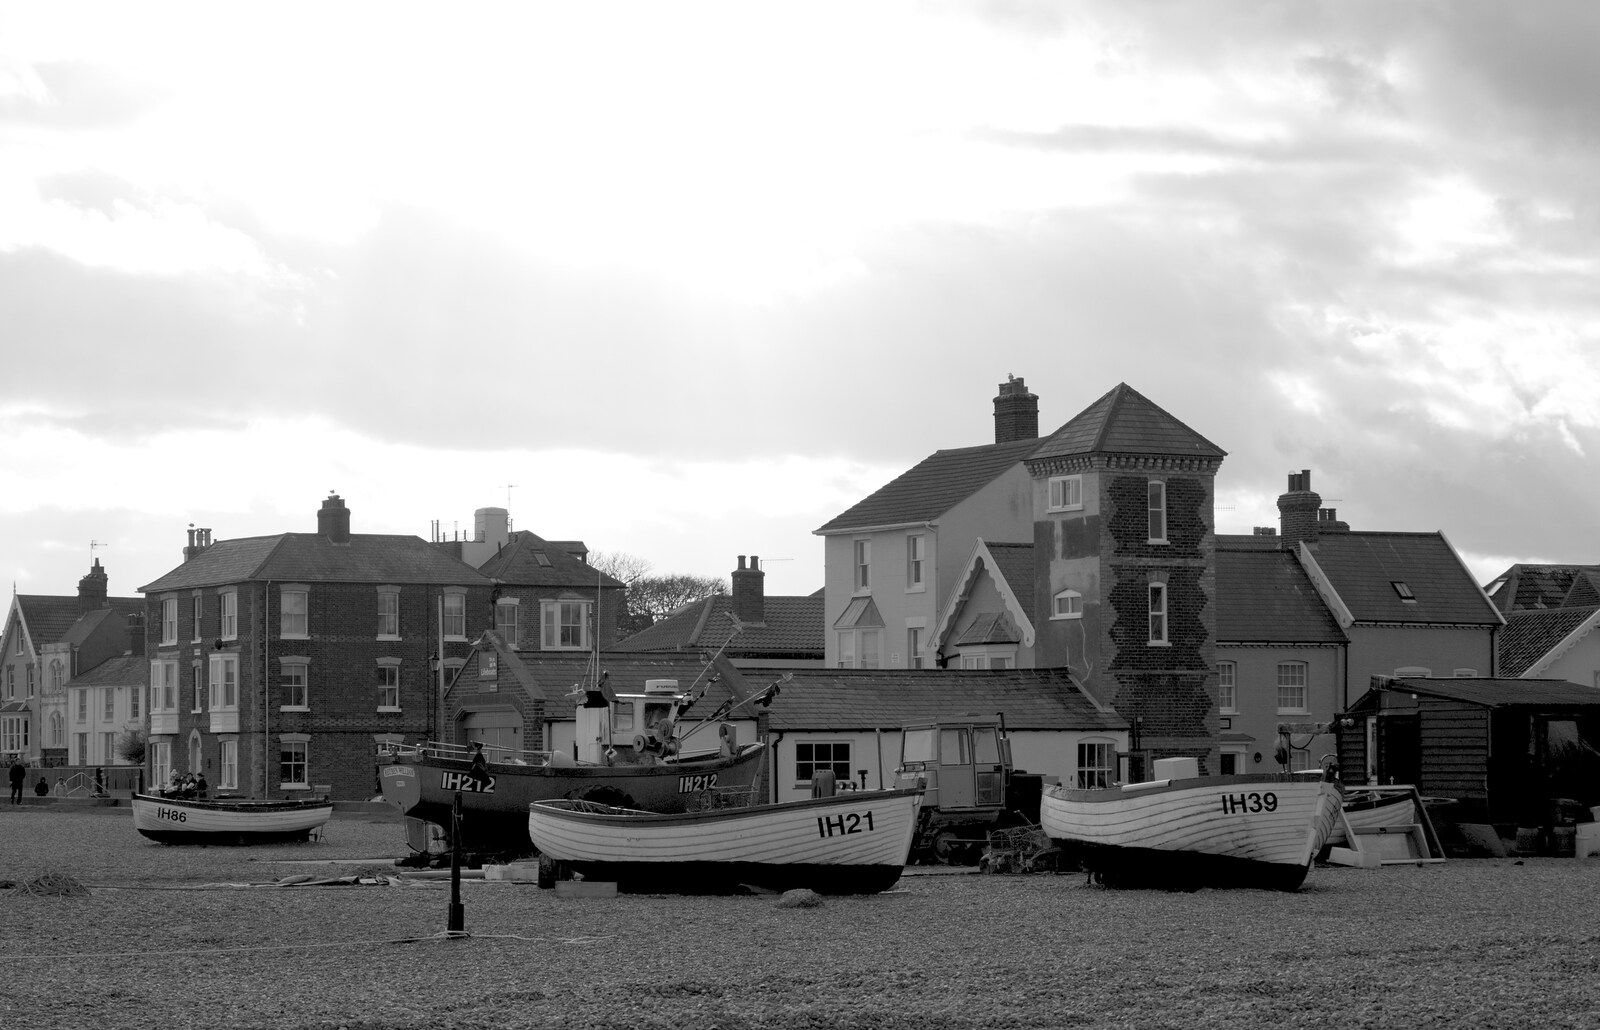 Fishing boats on Aldeburgh sea front from A Trip to Aldeburgh, Suffolk - 7th February 2016